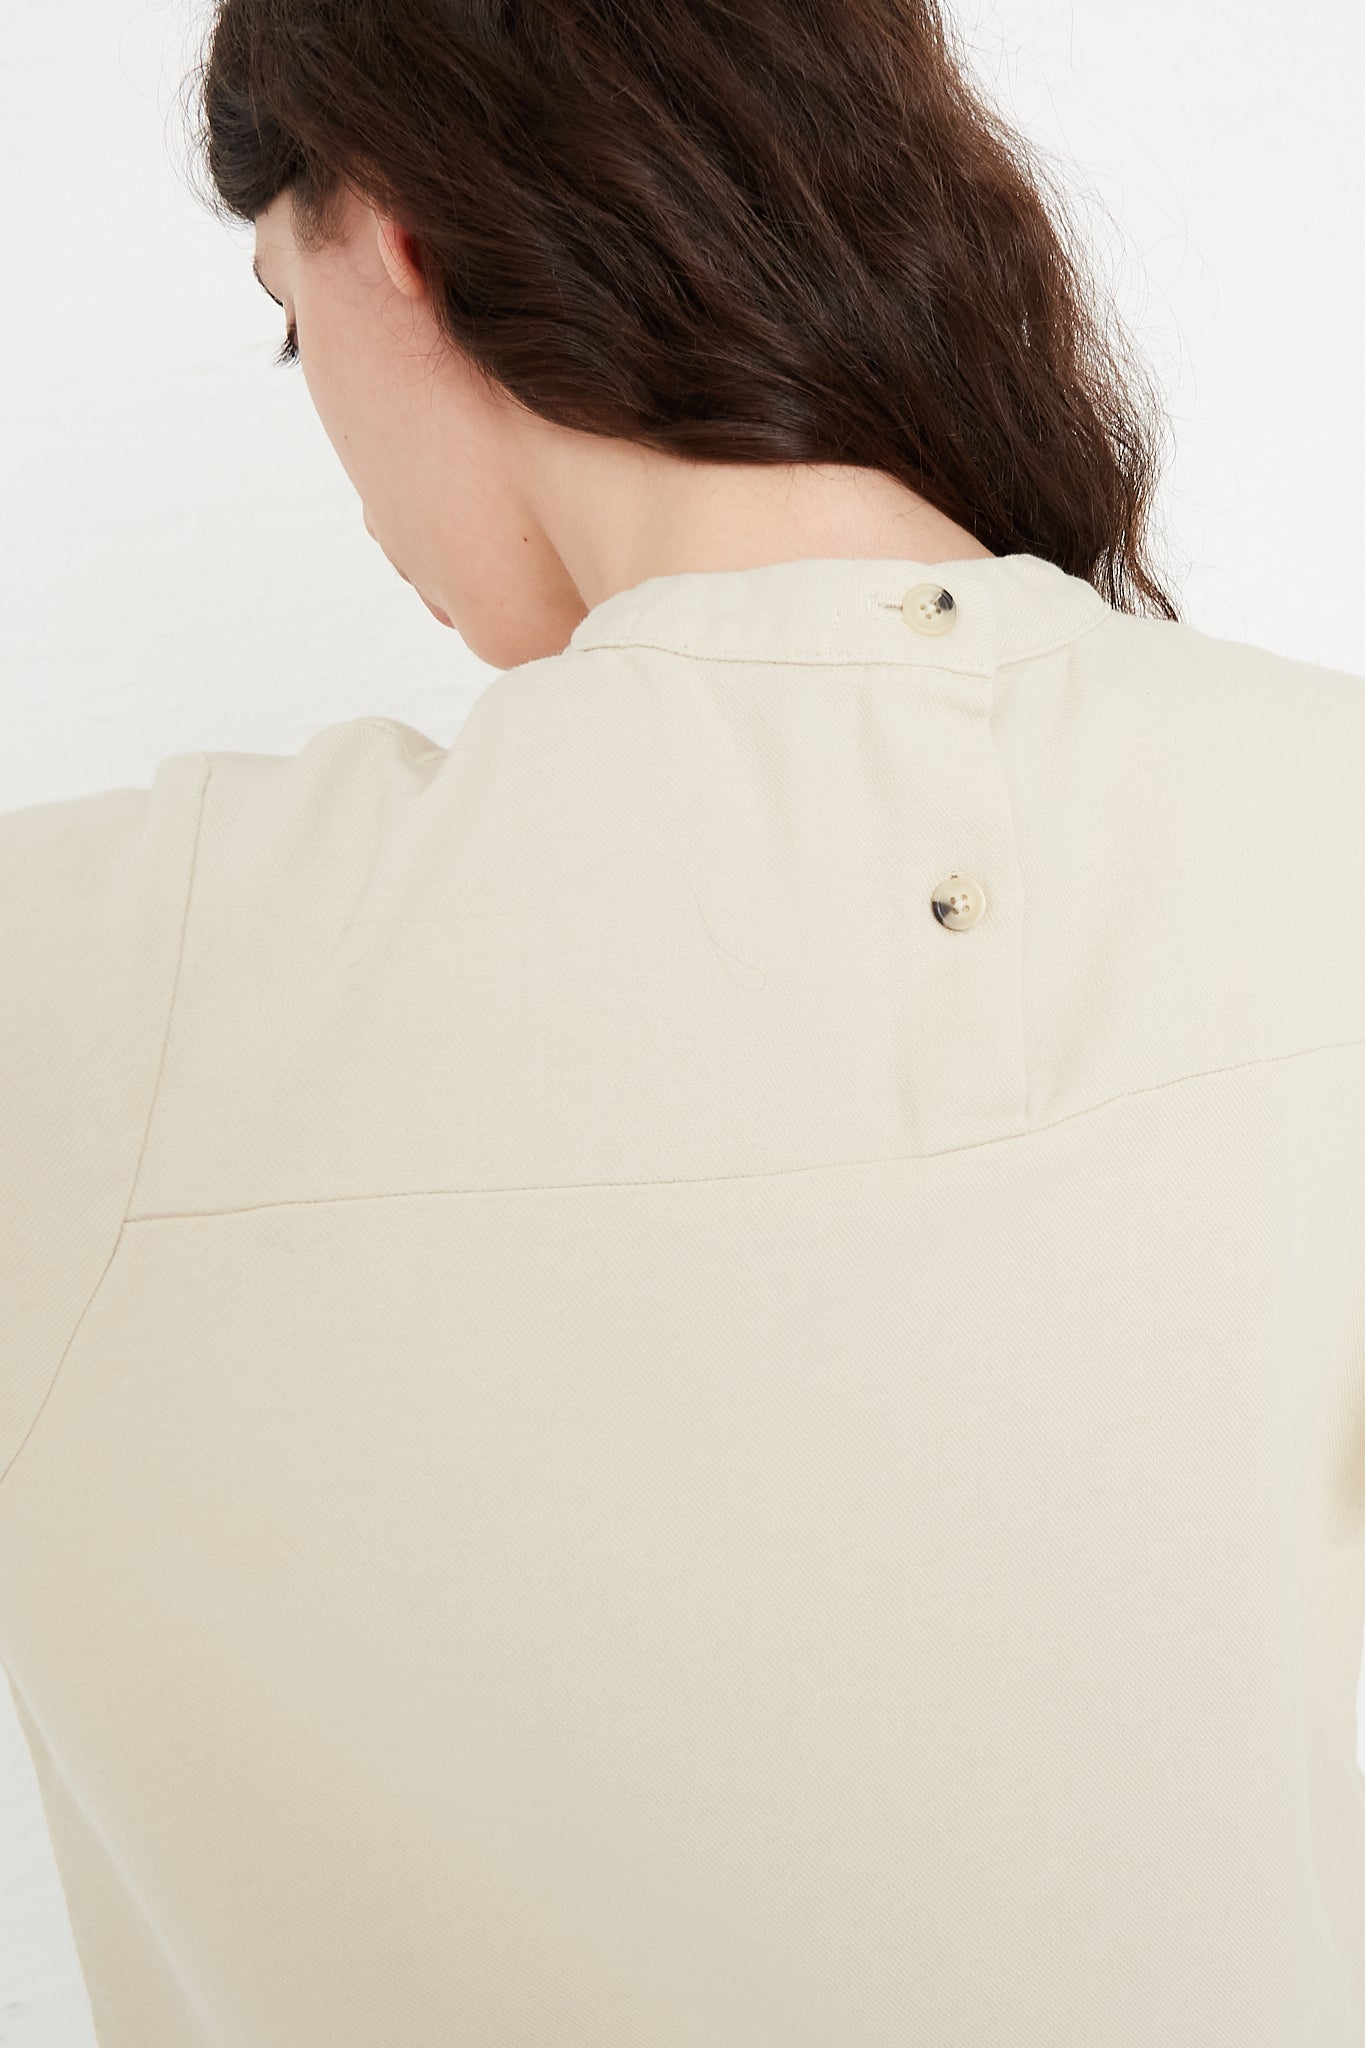 Cotton Twill Puff Sleeve Blouse in Ivory by Black Crane for Oroboro Back